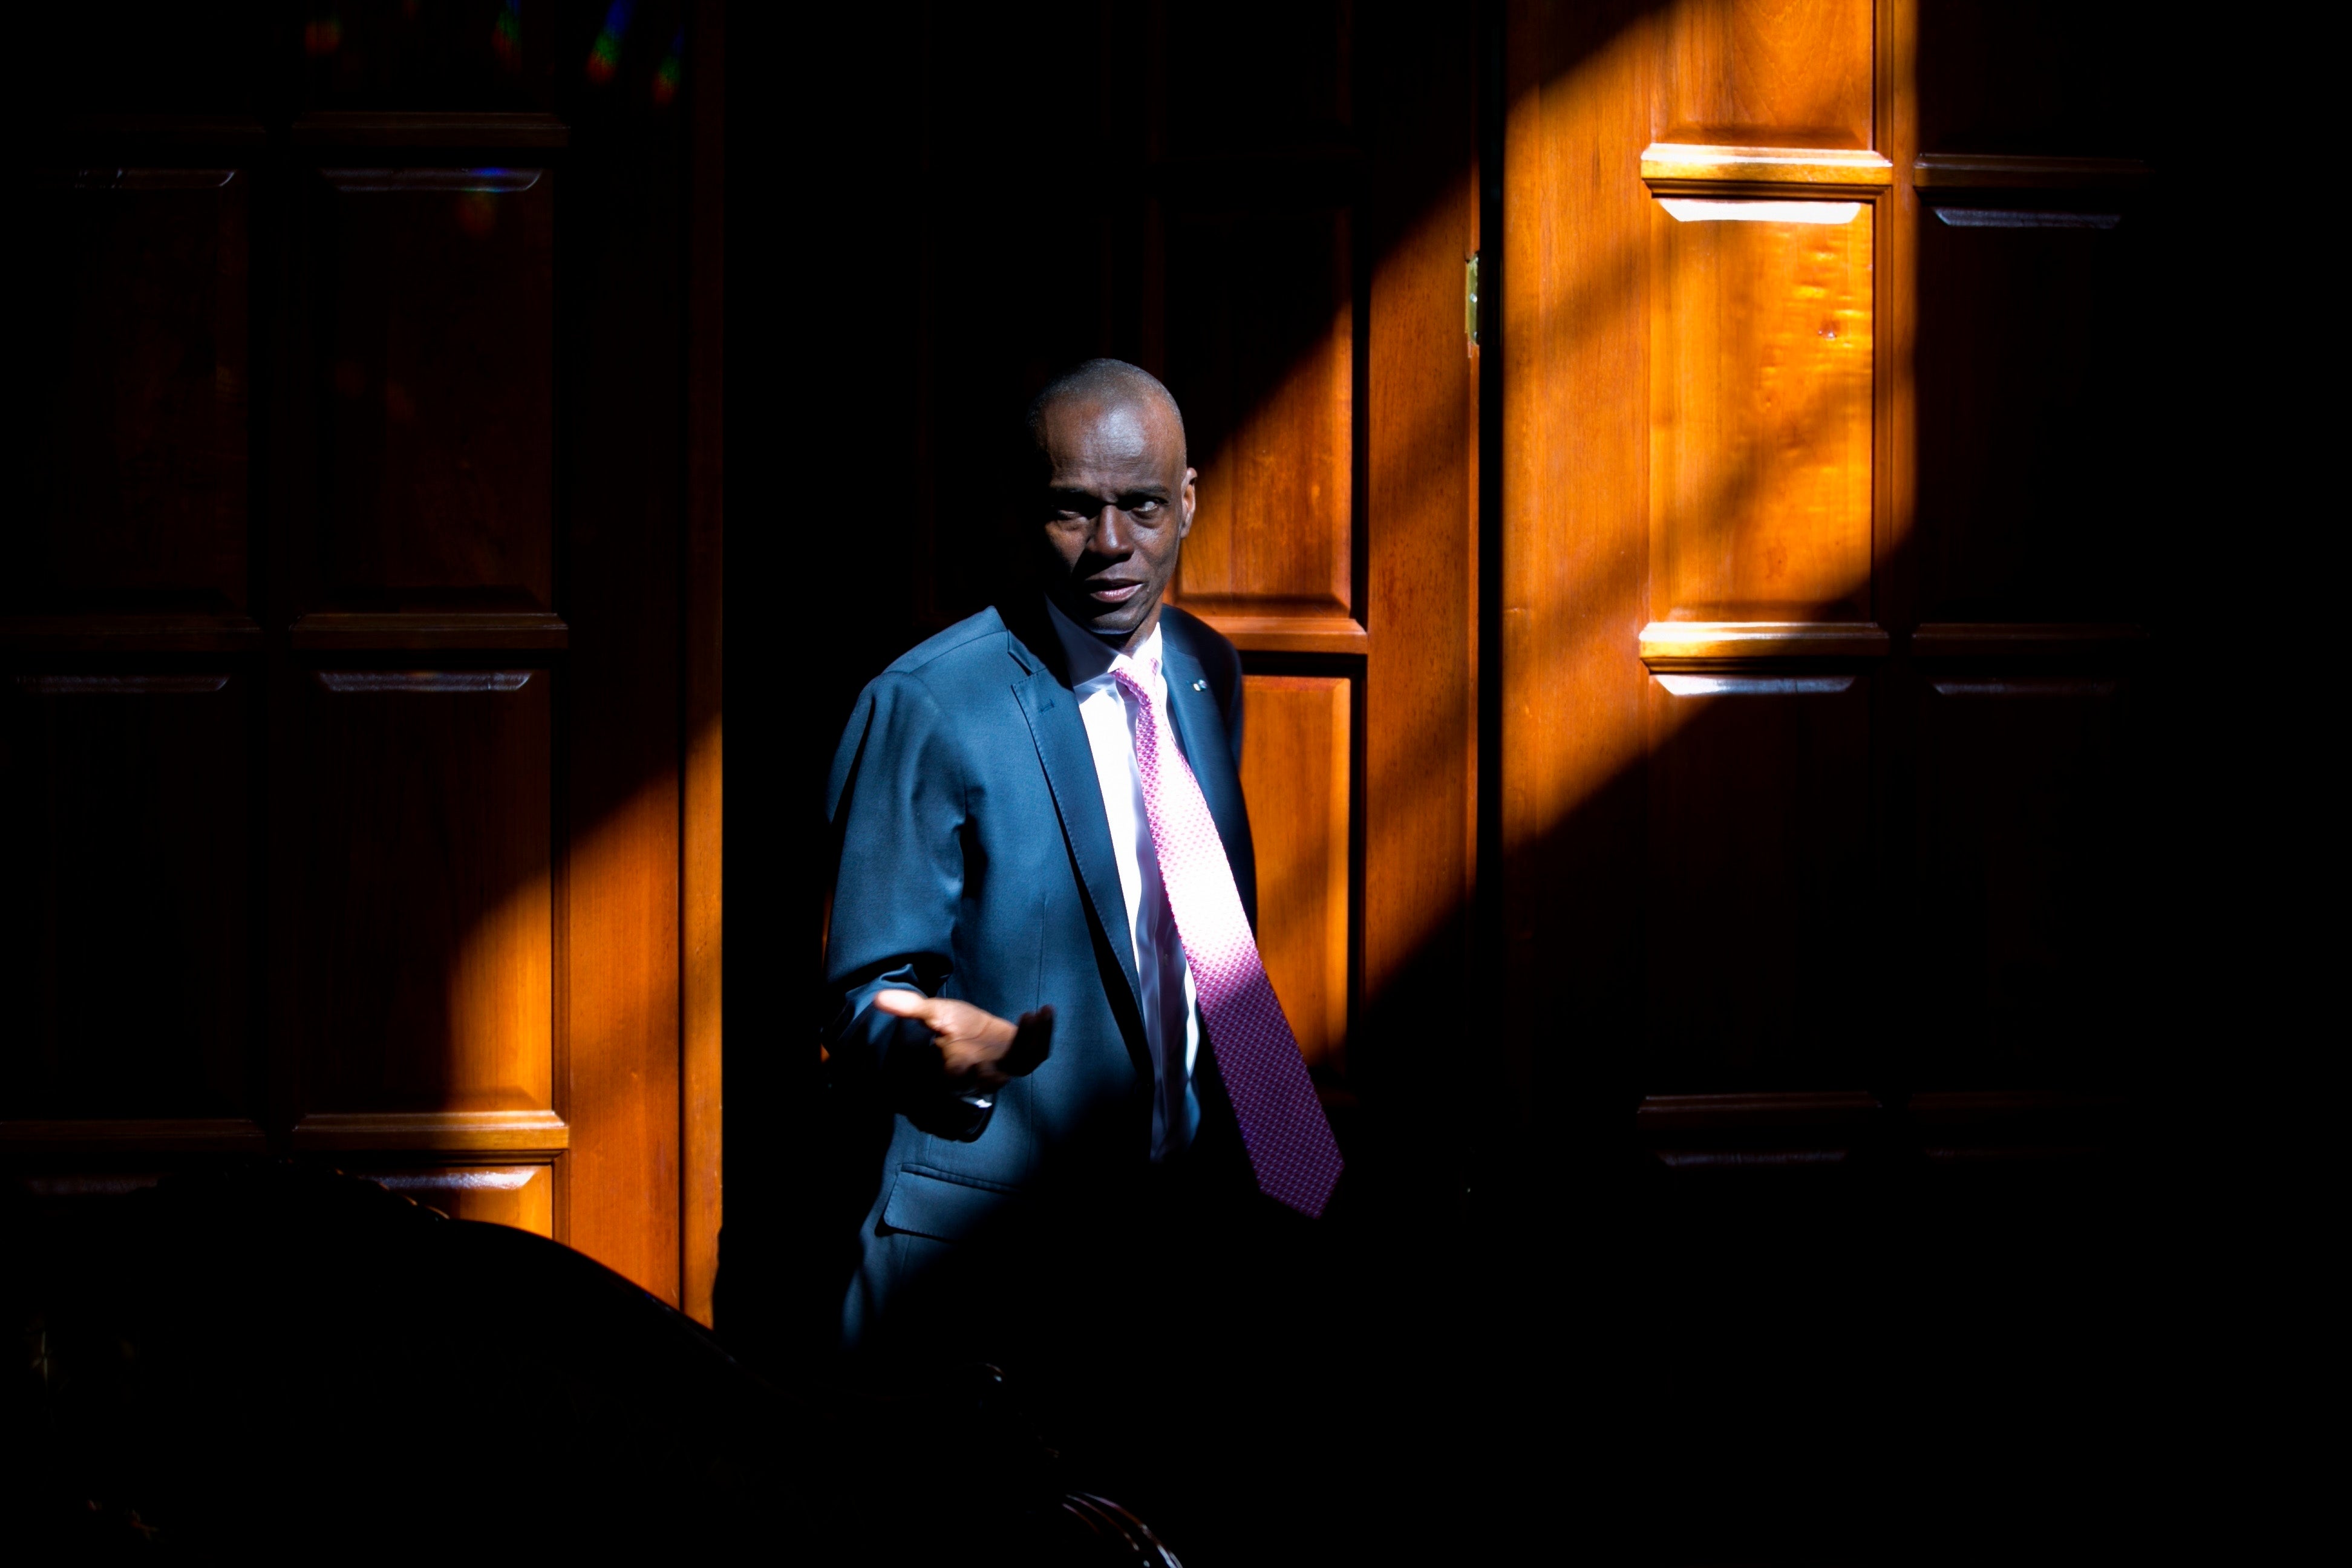 In this February 7, 2020, file photo, Haitian President Jovenel Moïse arrives for an interview at his home in Petion-Ville, a suburb of Port-au-Prince, Haiti. Moïse was killed and first lady Martine Moïse was wounded in an attack on his private residence early Wednesday, July 7, 2021.